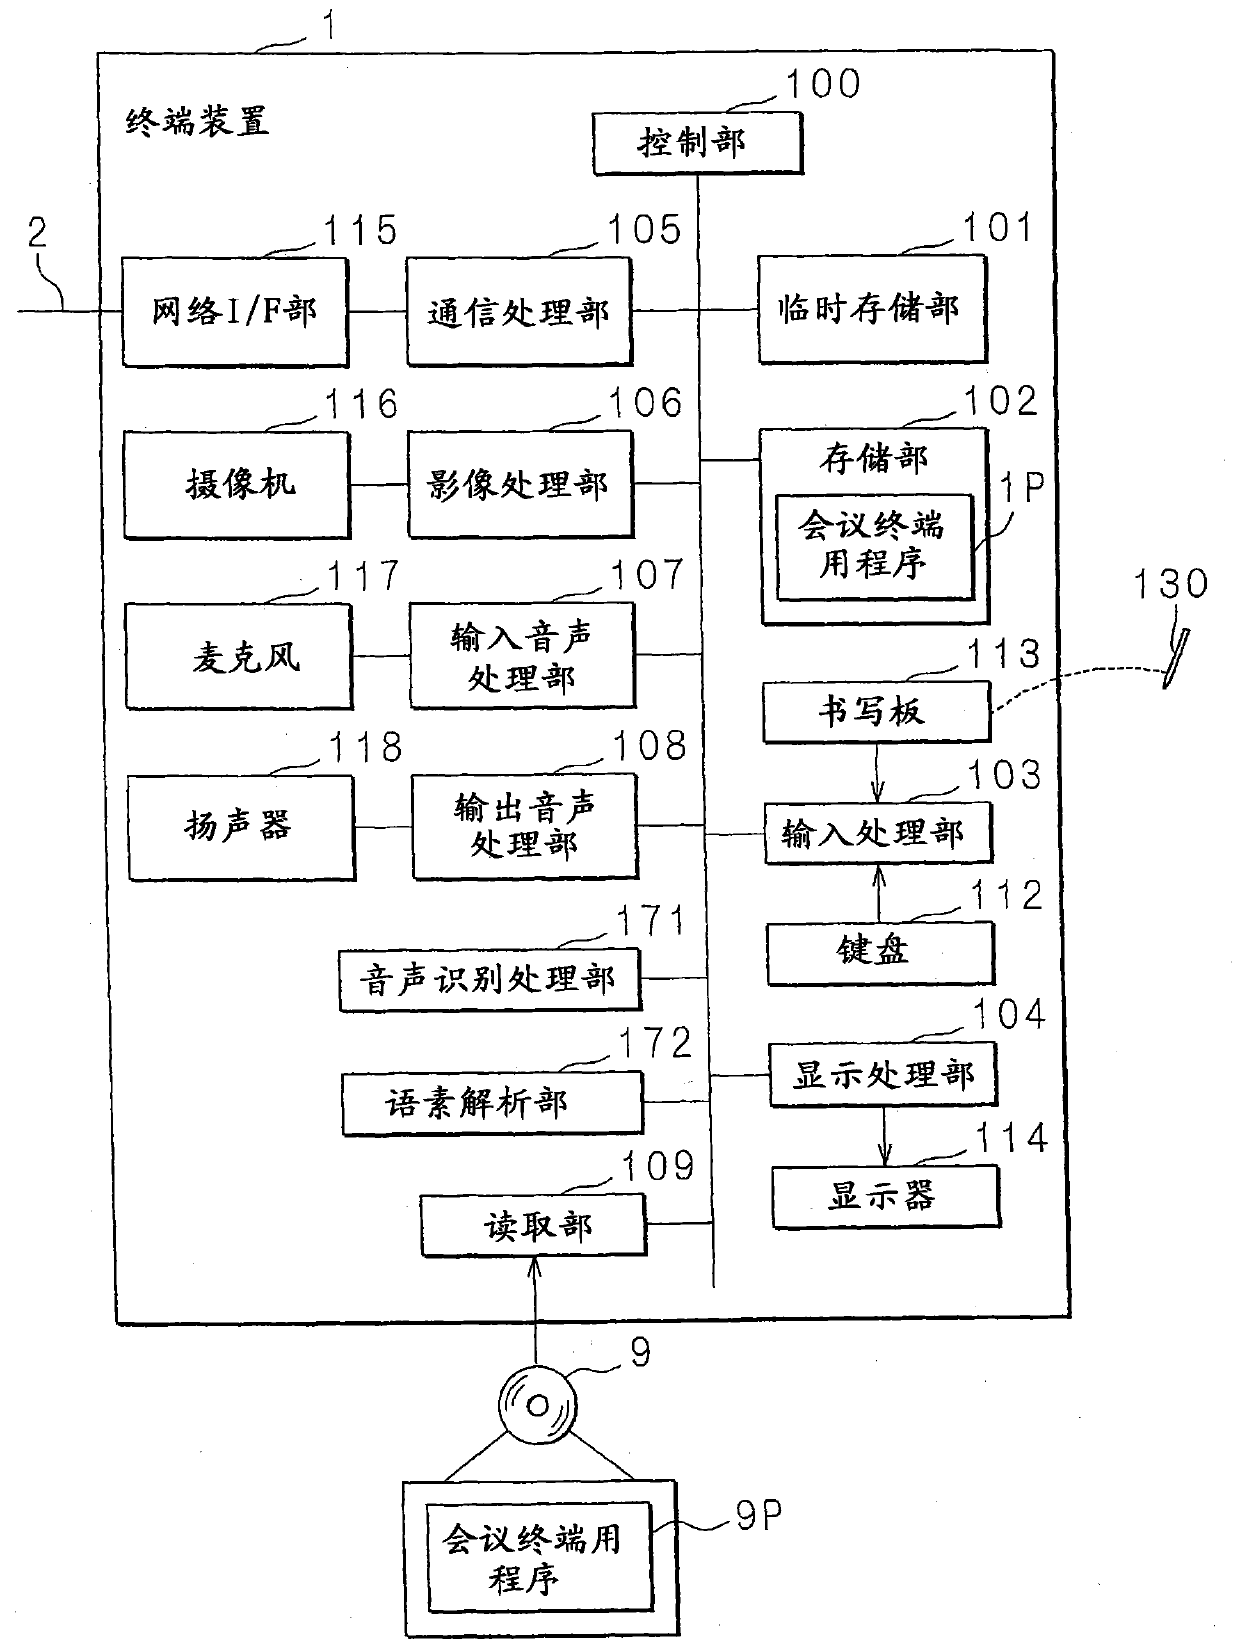 Information processing apparatus, conference system and information processing method